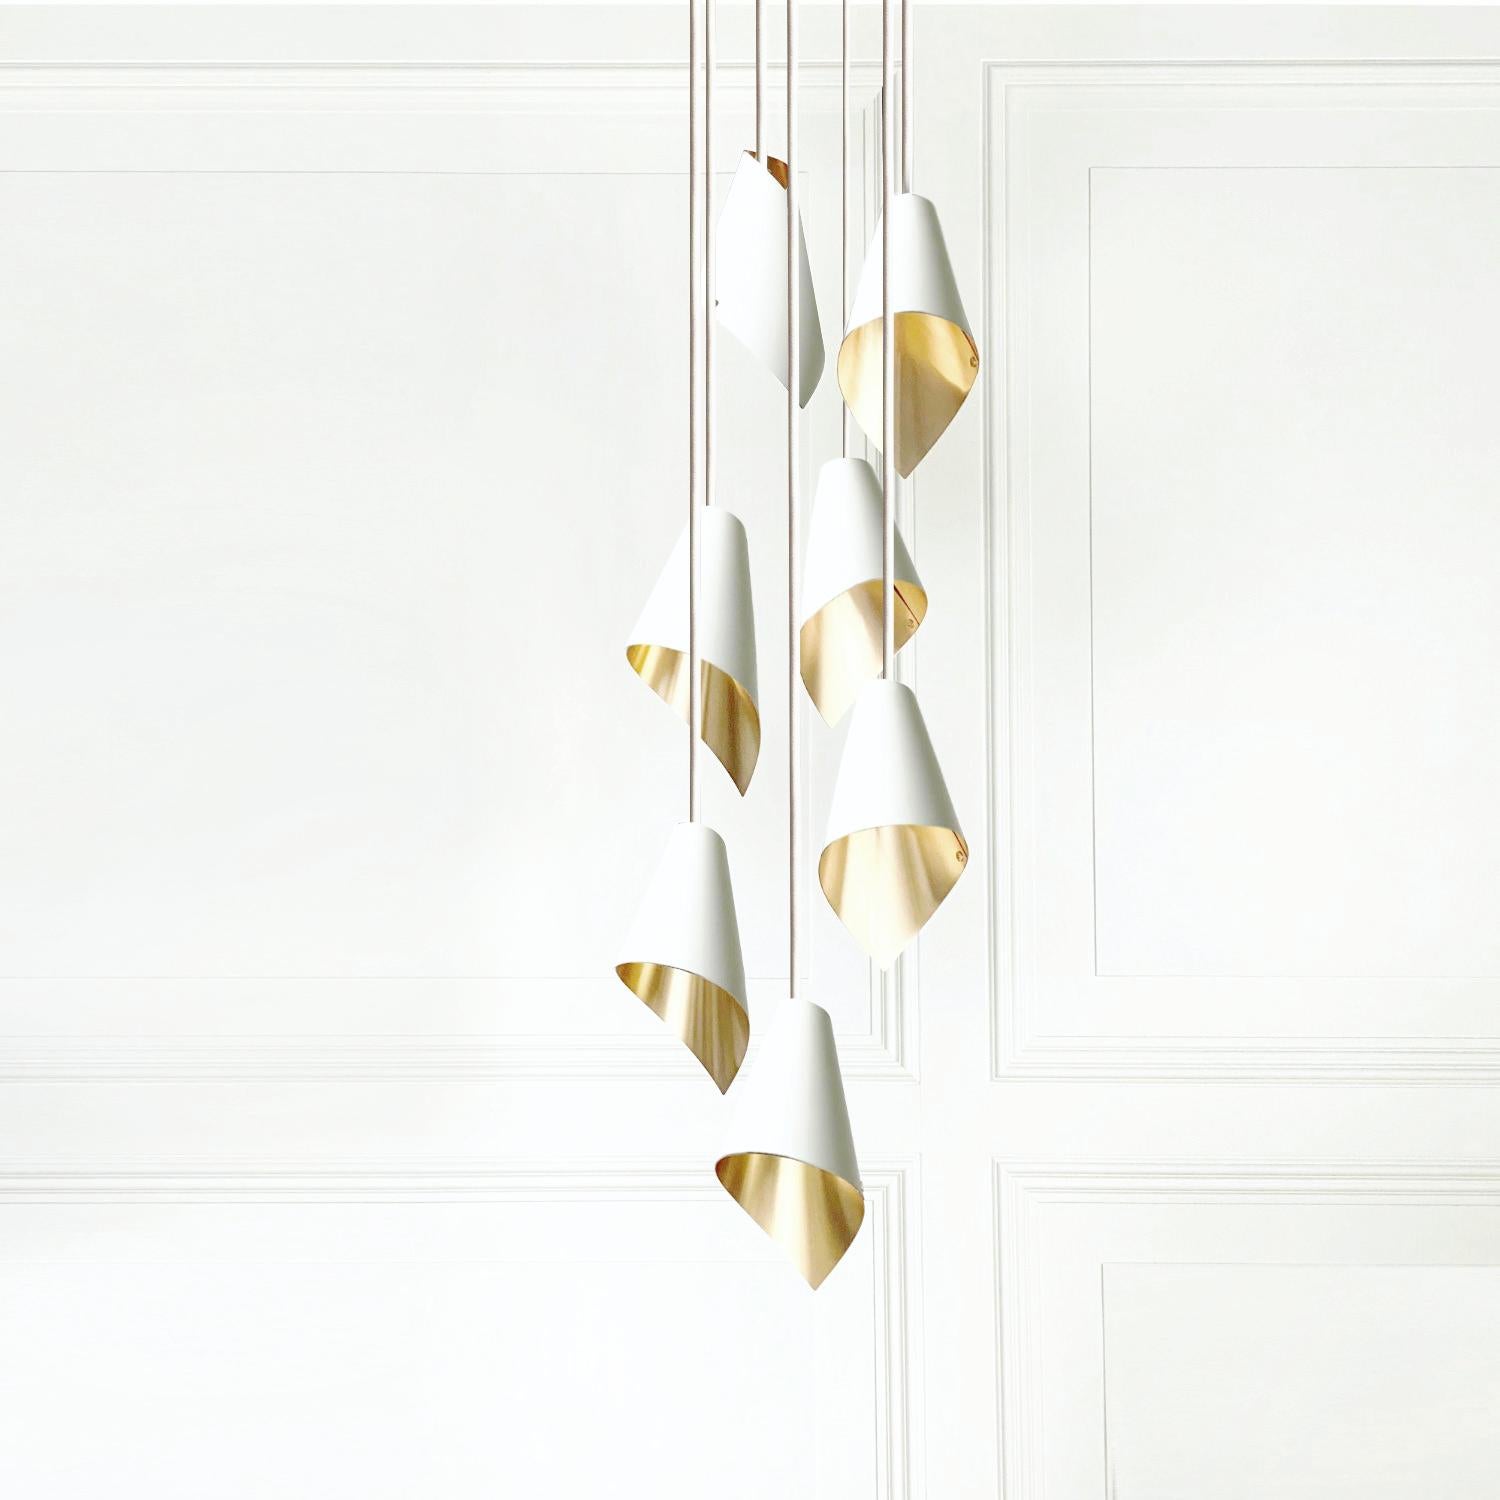 European ARC 7 Modern Pendant Light in White and Brushed Brass Made in Britain For Sale